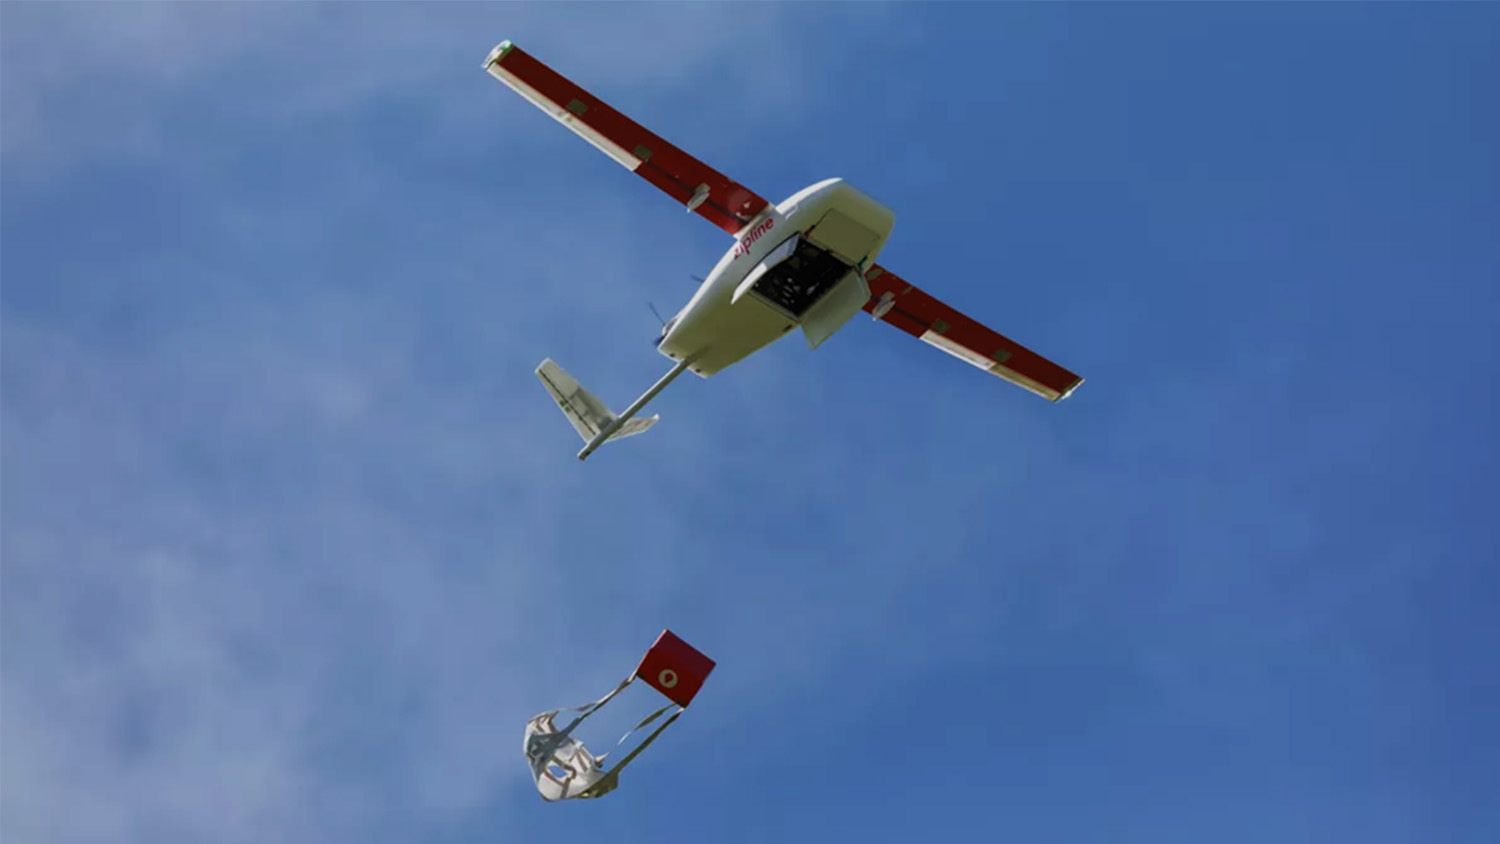 Medical drone delivery, coming to a city near you. How does that make you feel? Credit: <a href='https://flyzipline.com/'>Zipline</a>